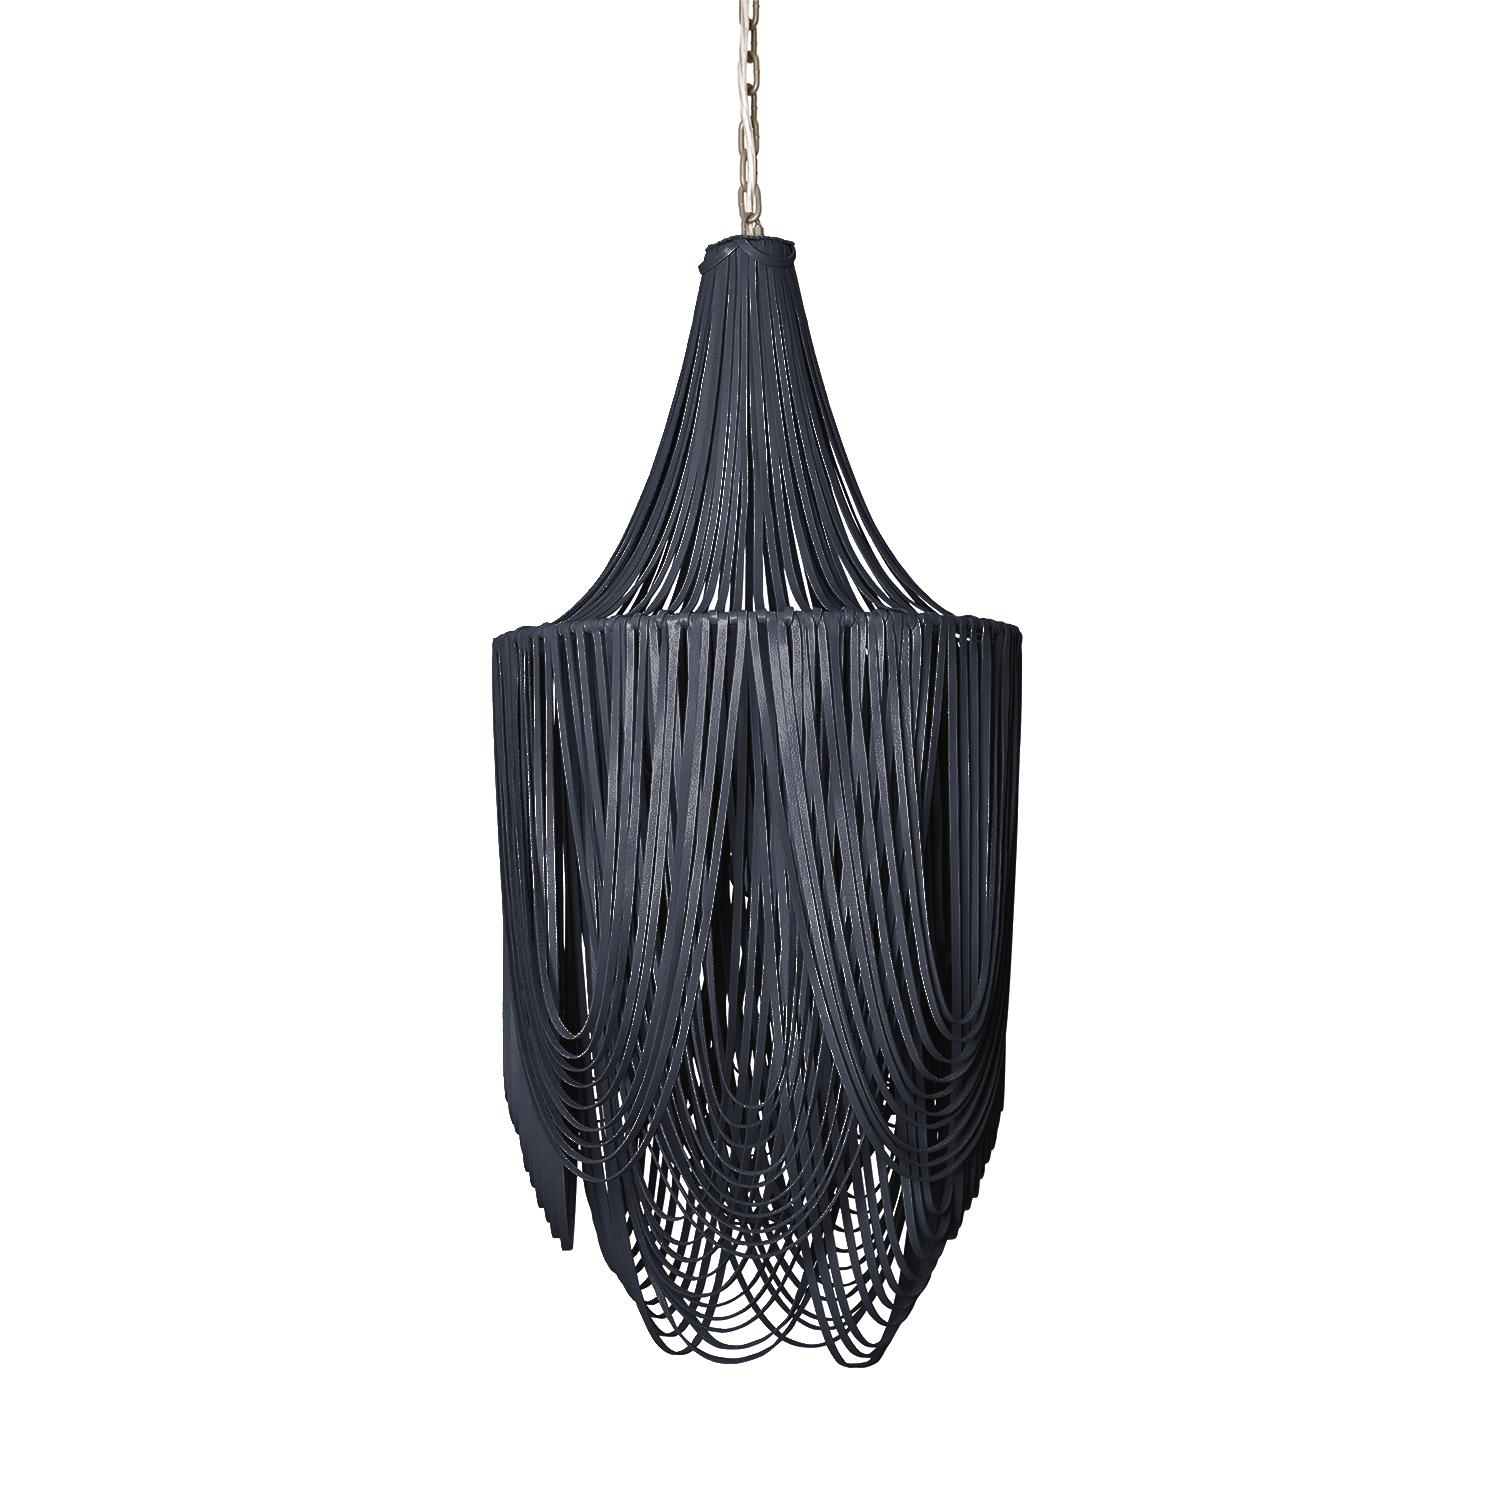 Small Round Whisper with Crown Leather Chandelier in NeKeia Leather